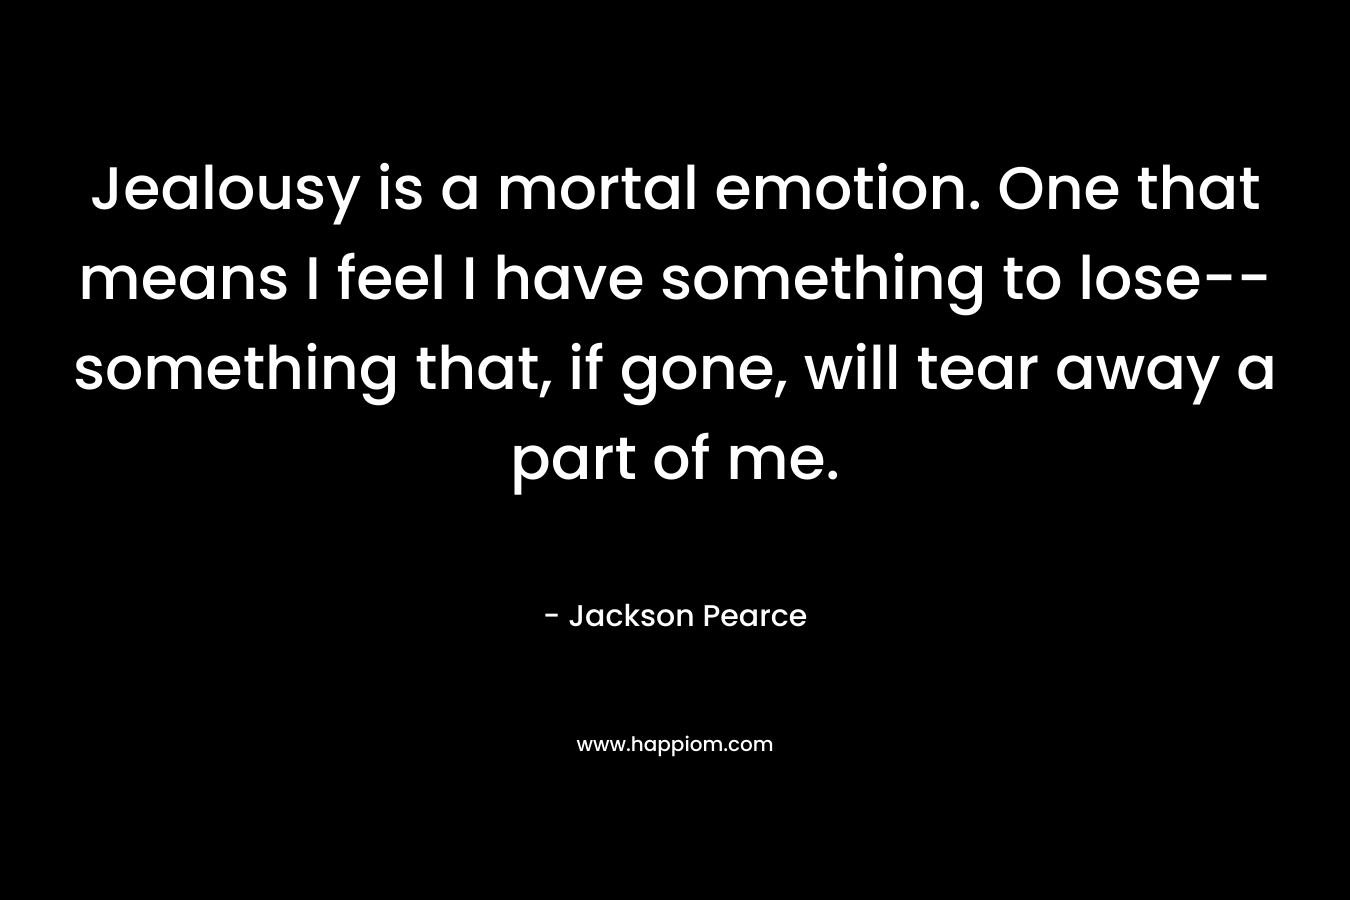 Jealousy is a mortal emotion. One that means I feel I have something to lose–something that, if gone, will tear away a part of me. – Jackson Pearce